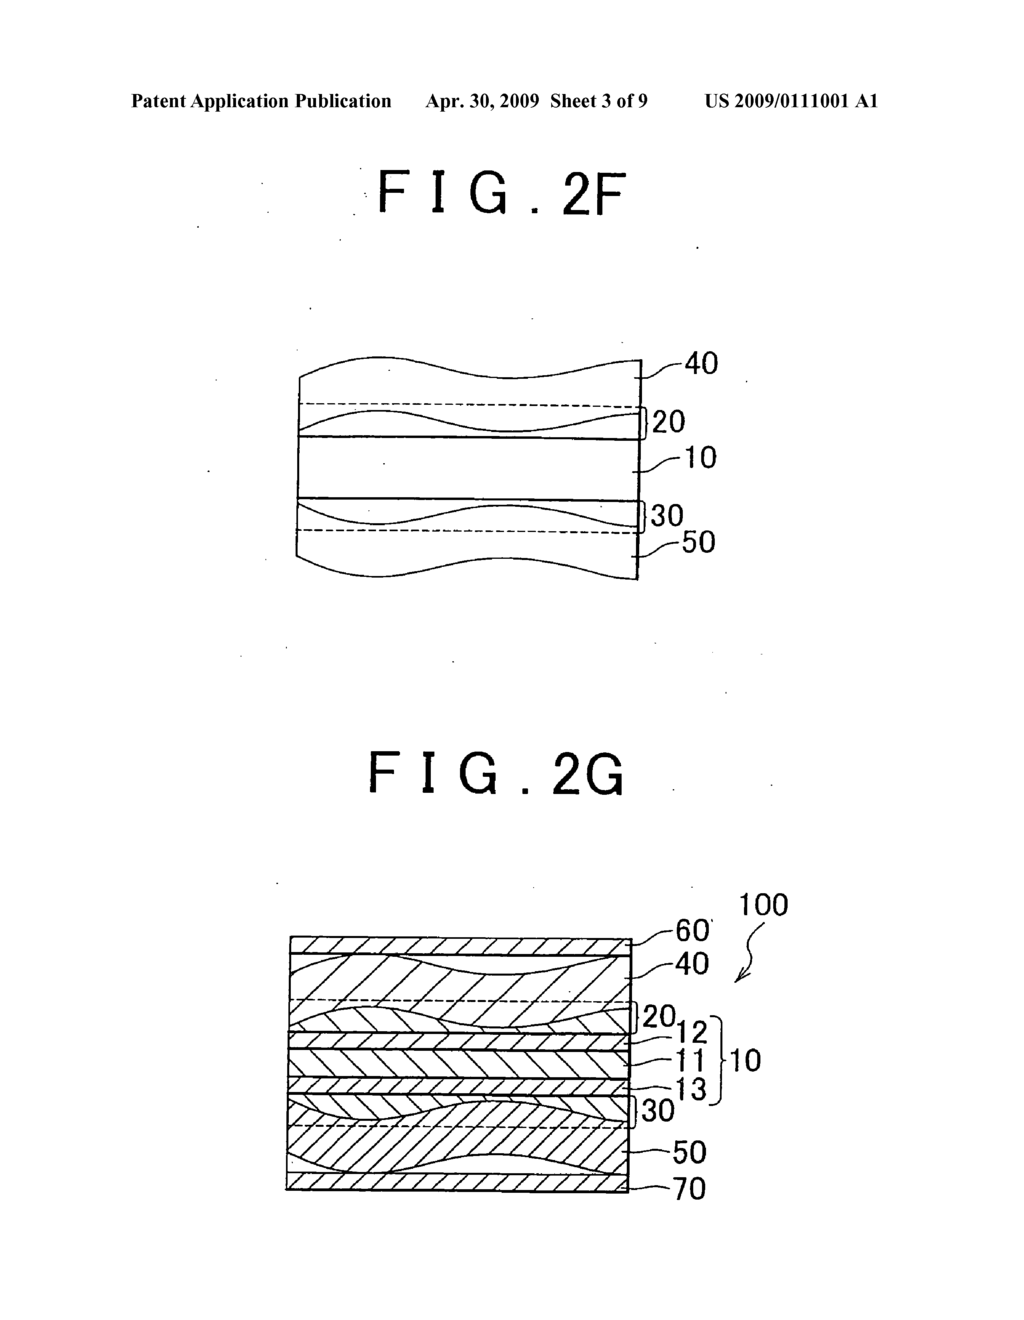 Electrically Conductive Porous Body for a Fuel Cell, Fuel Cell Having Same, and Method of Manufacturing Same - diagram, schematic, and image 04